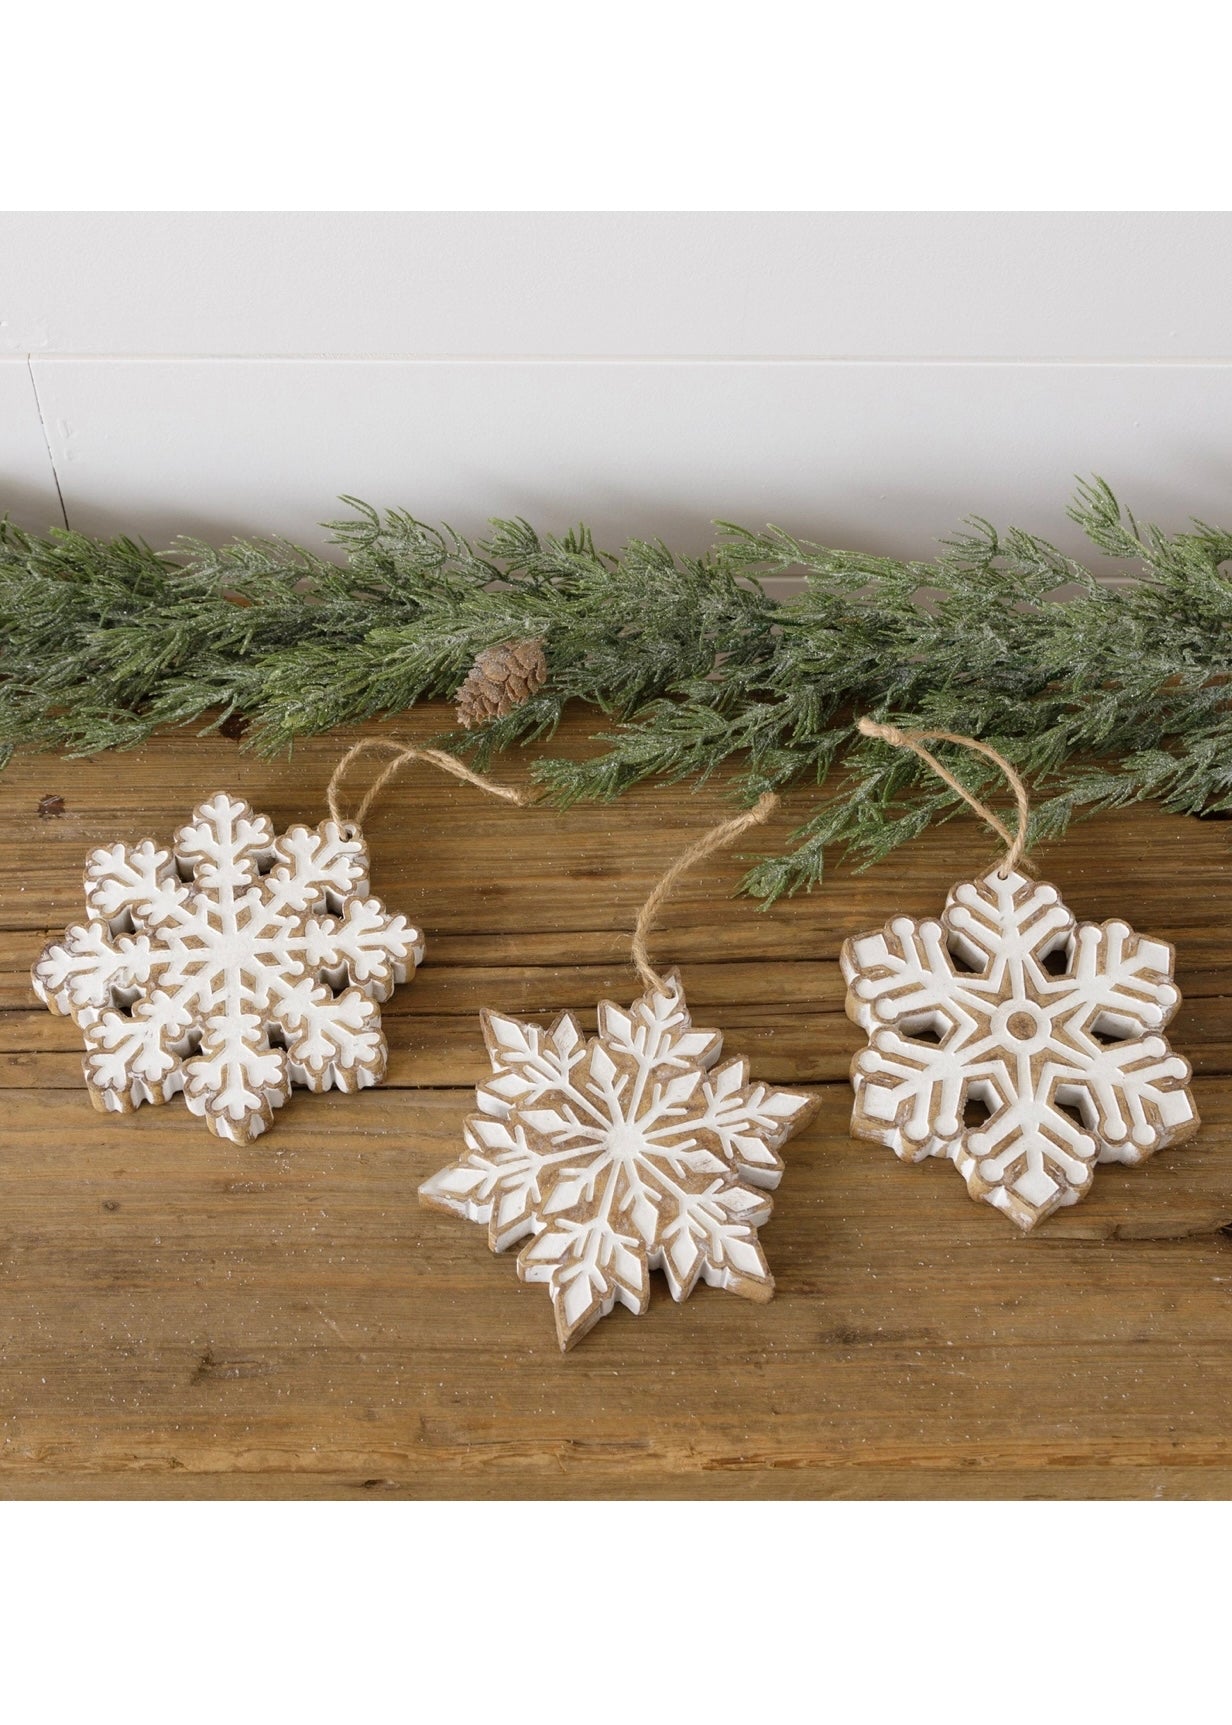 Frosty Snowflake Ornaments